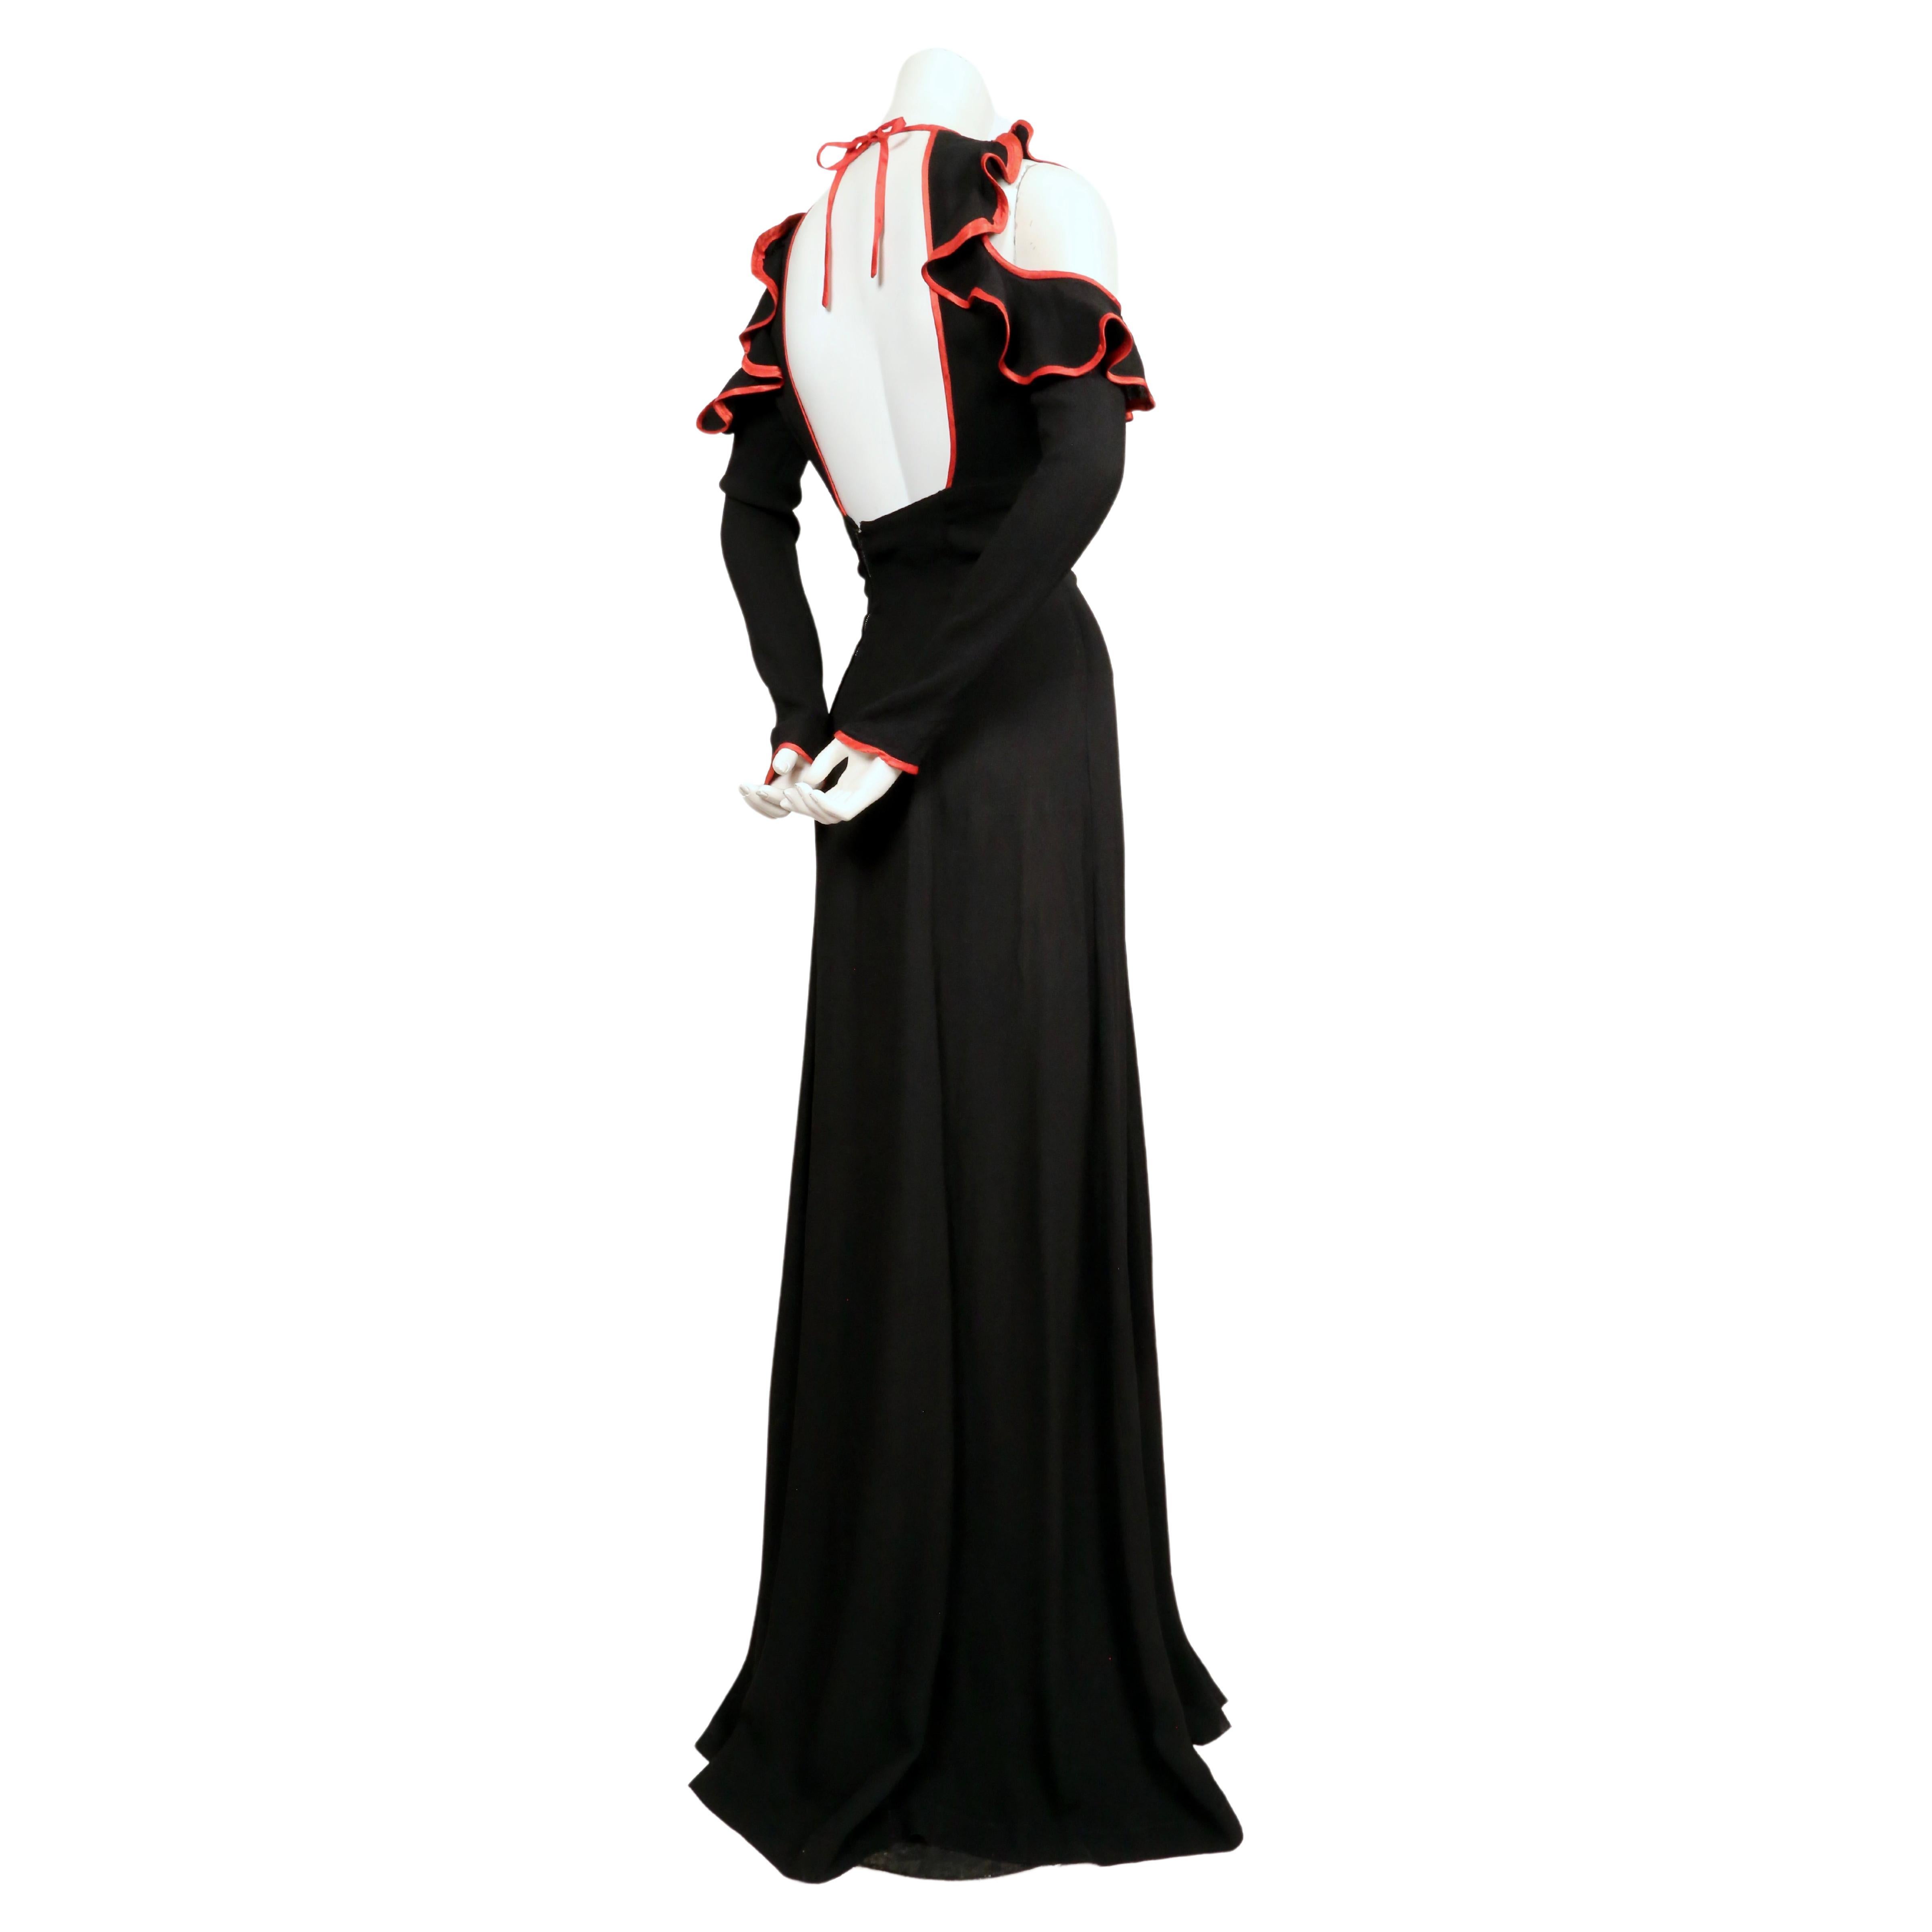 1968 OSSIE CLARK black moss crepe dress with keyhole neckline ruffles & red trim For Sale 2